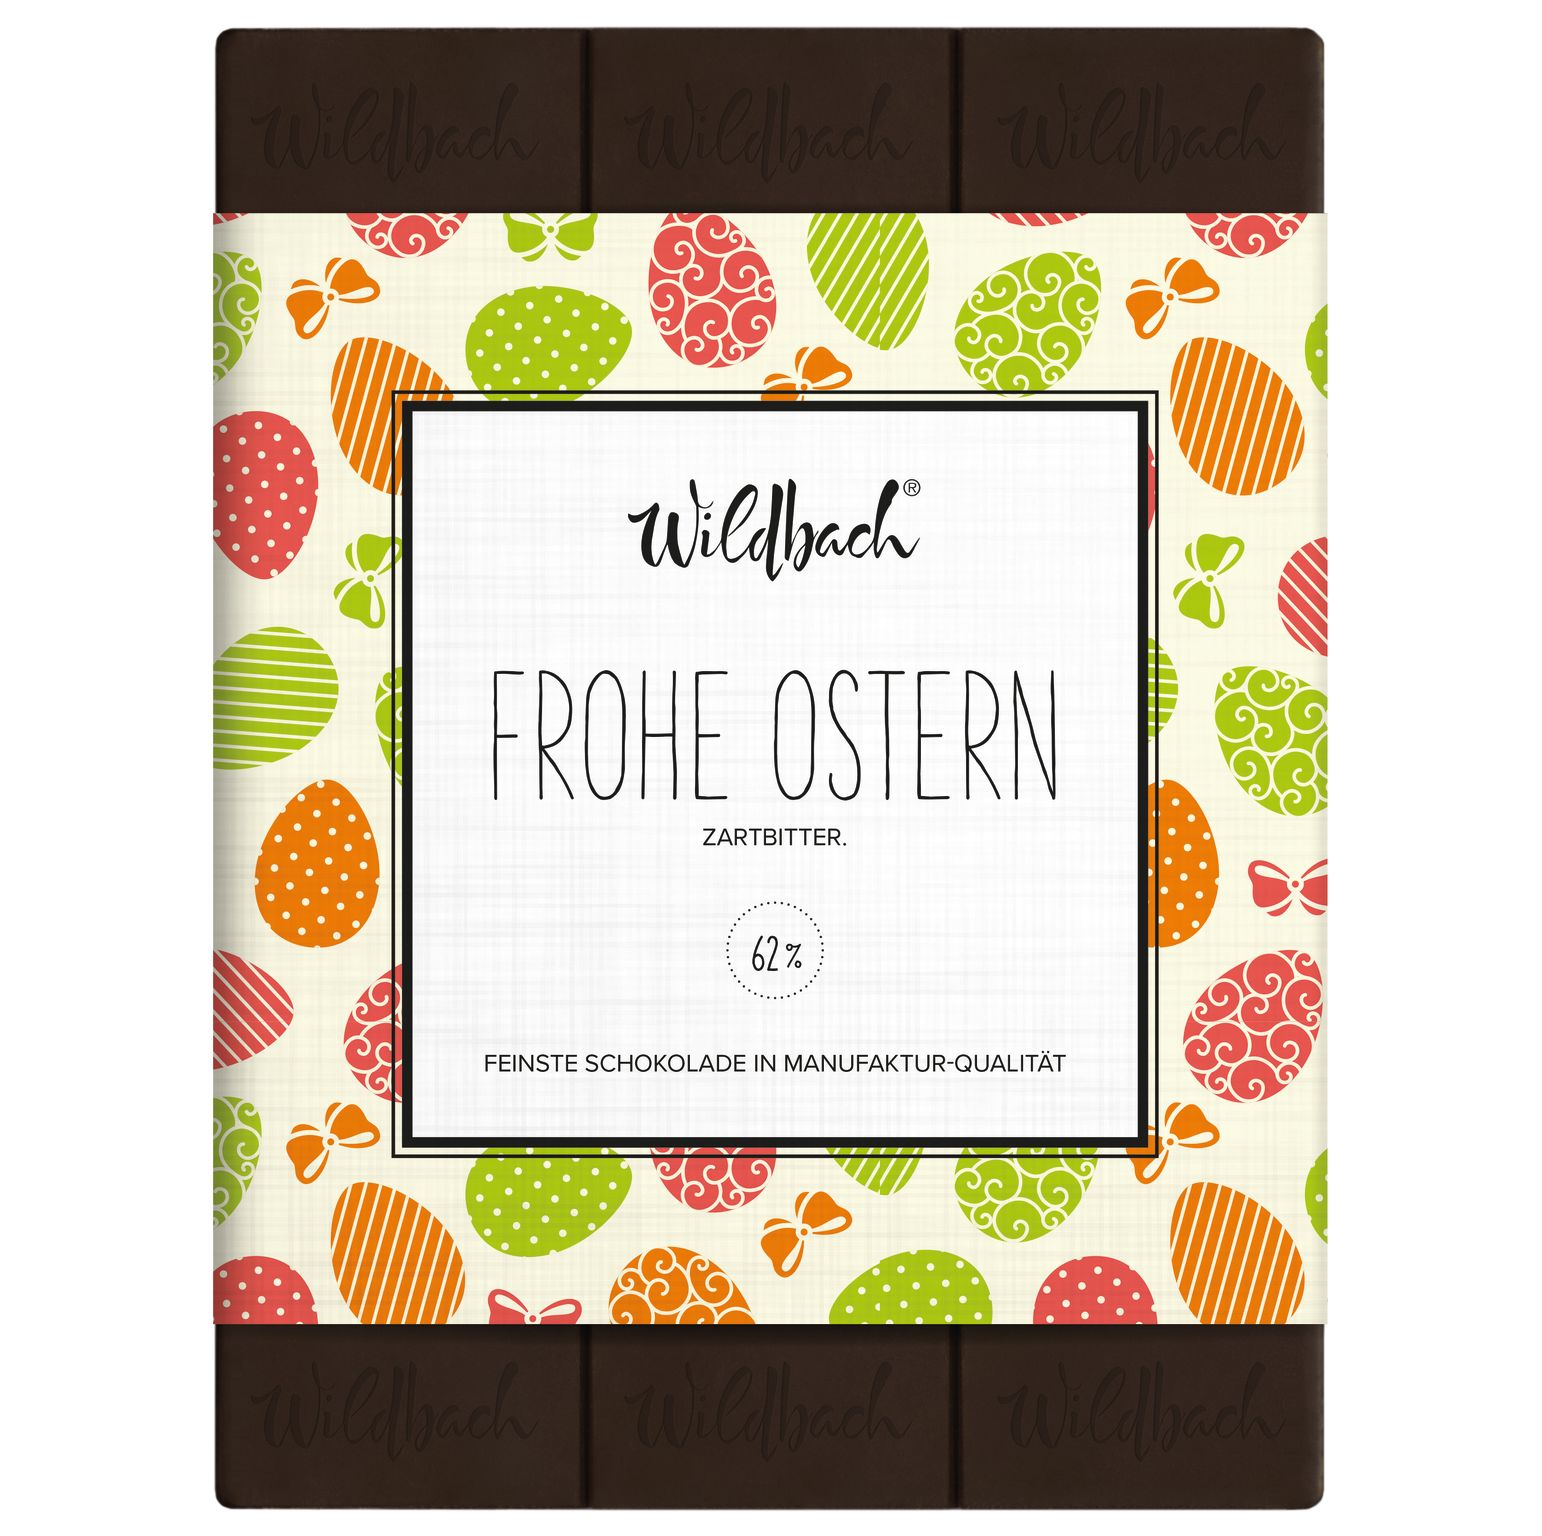 70g Tafel Frohe Ostern -  Edel  ZB 62%